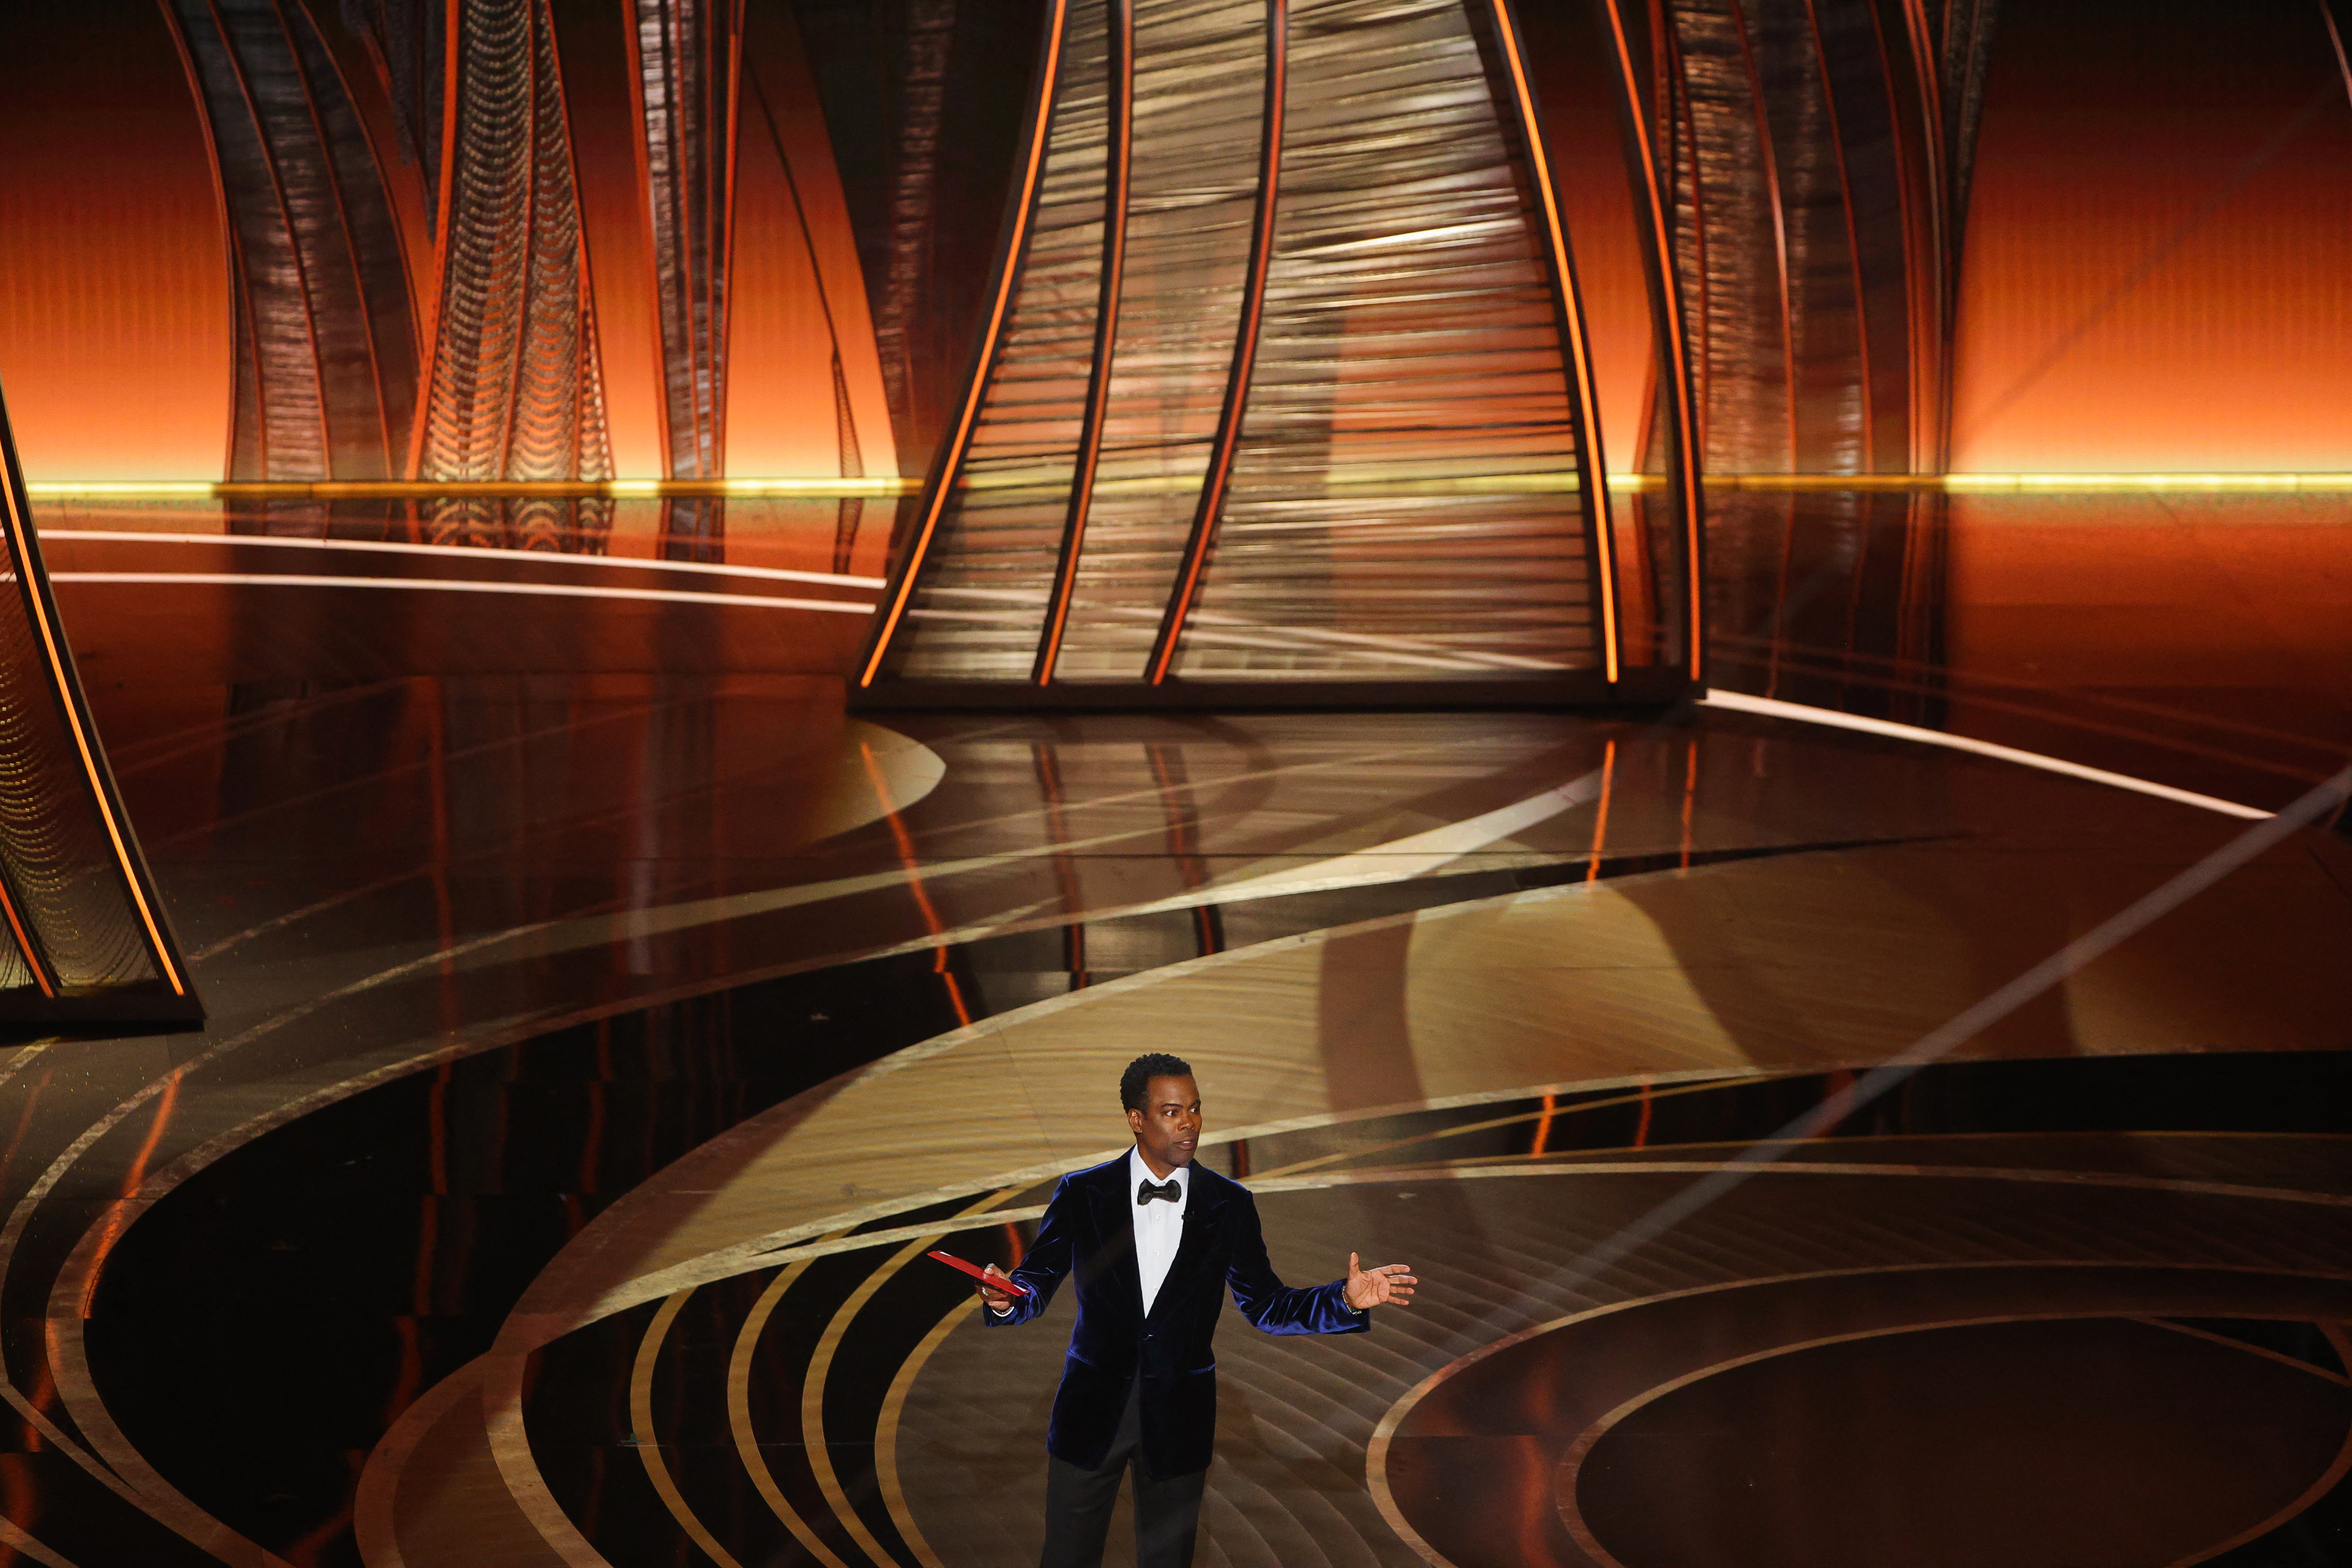 Chris Rock speaks to the audience at the 94th Academy Awards in Beverly Hills, California, U.S., March 27, 2022. REUTERS/Brian Snyder